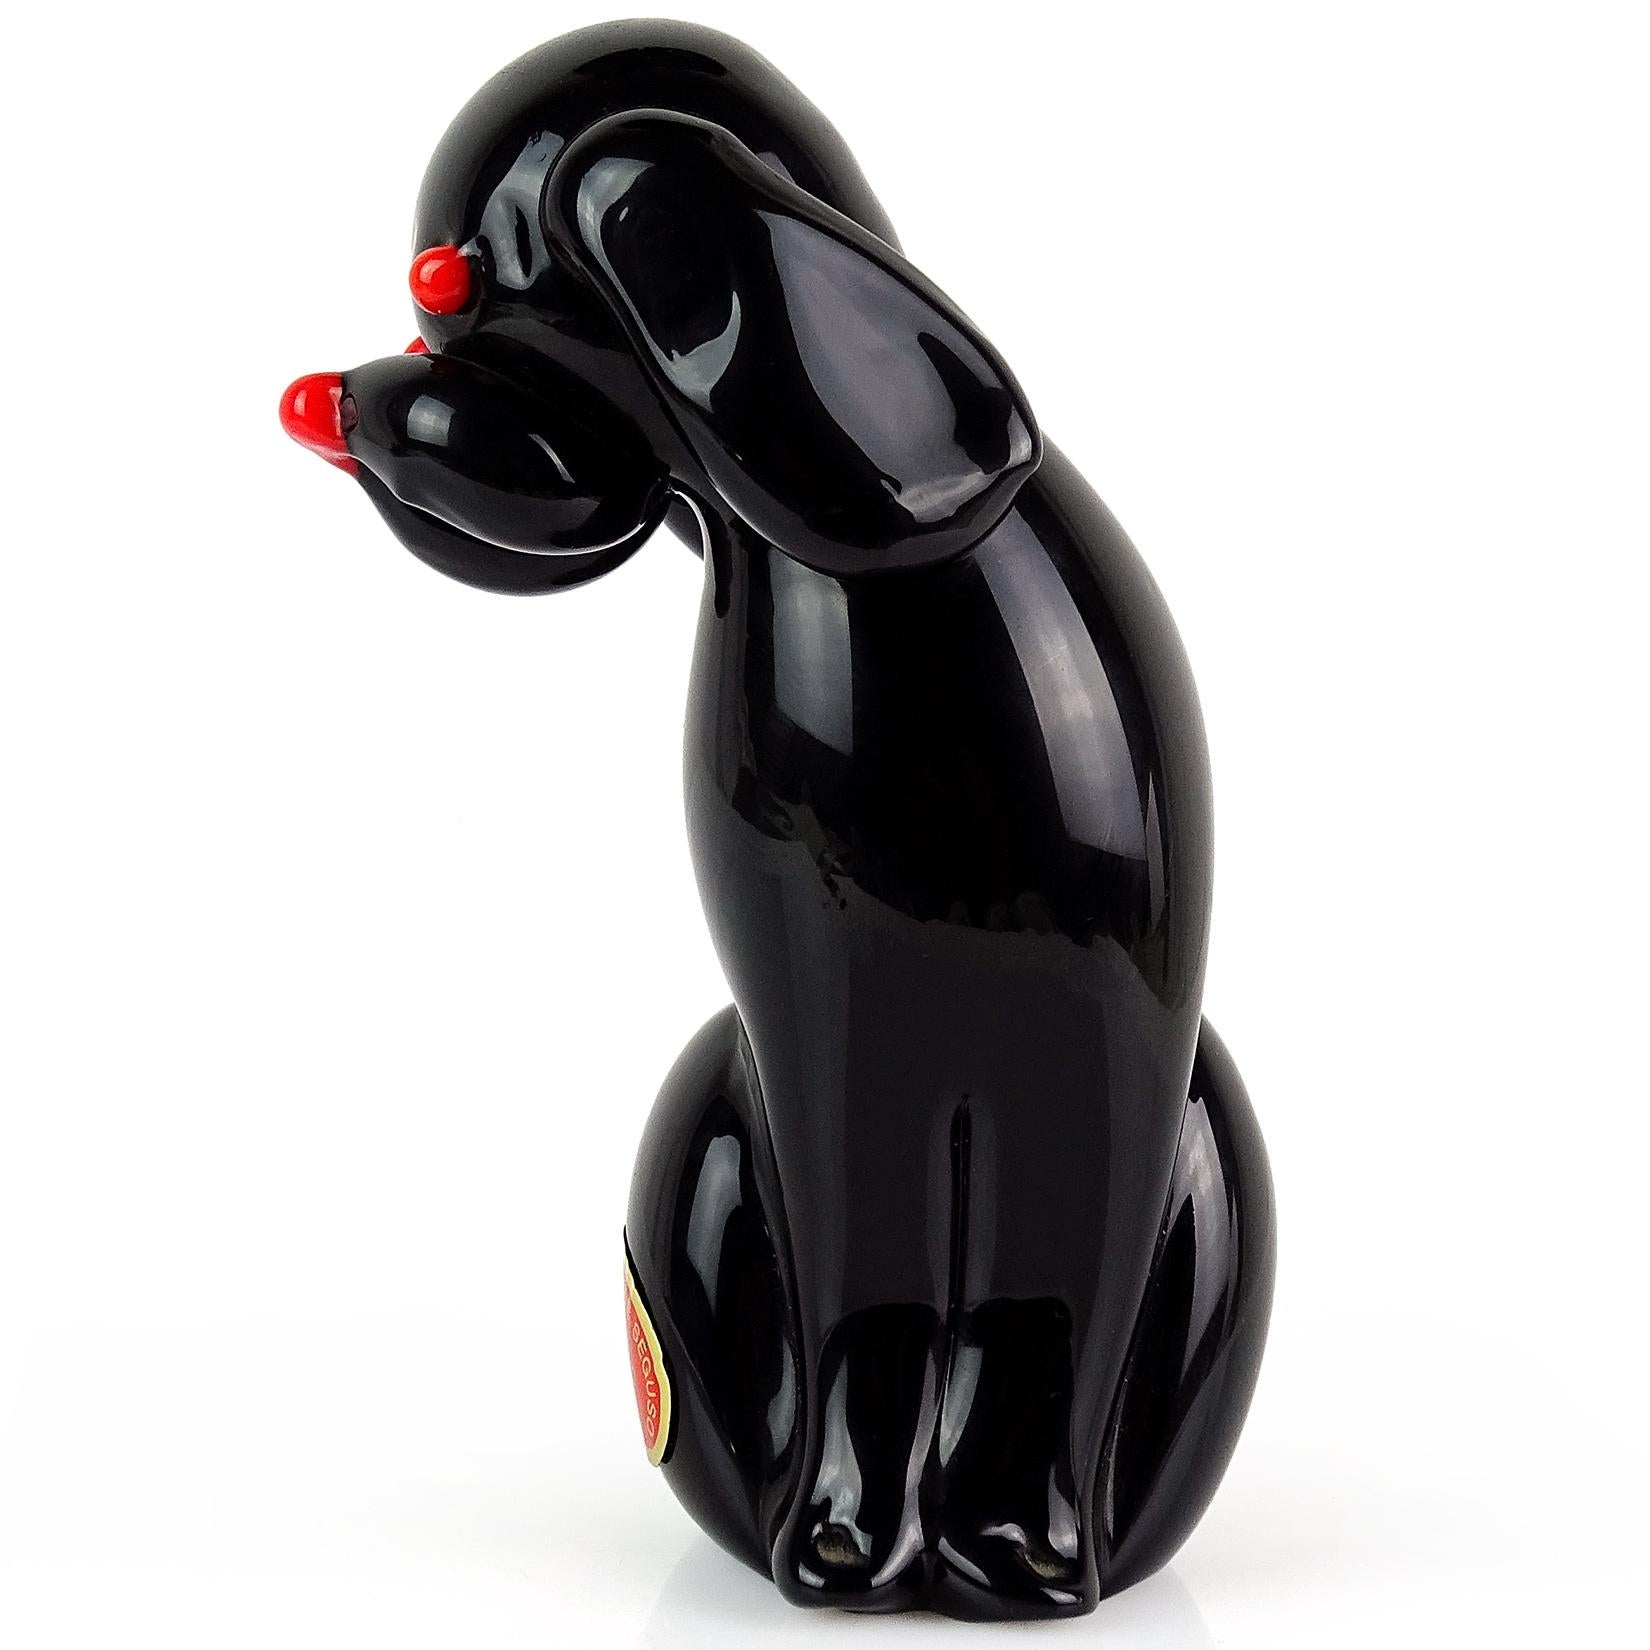 Cute Murano hand blown jet black with red Italian art glass puppy dog figurine / sculpture. Documented to designer Archimede Seguso, with original Murano - Made In Italy label. Nicely details form, with little dots of red accenting its face.